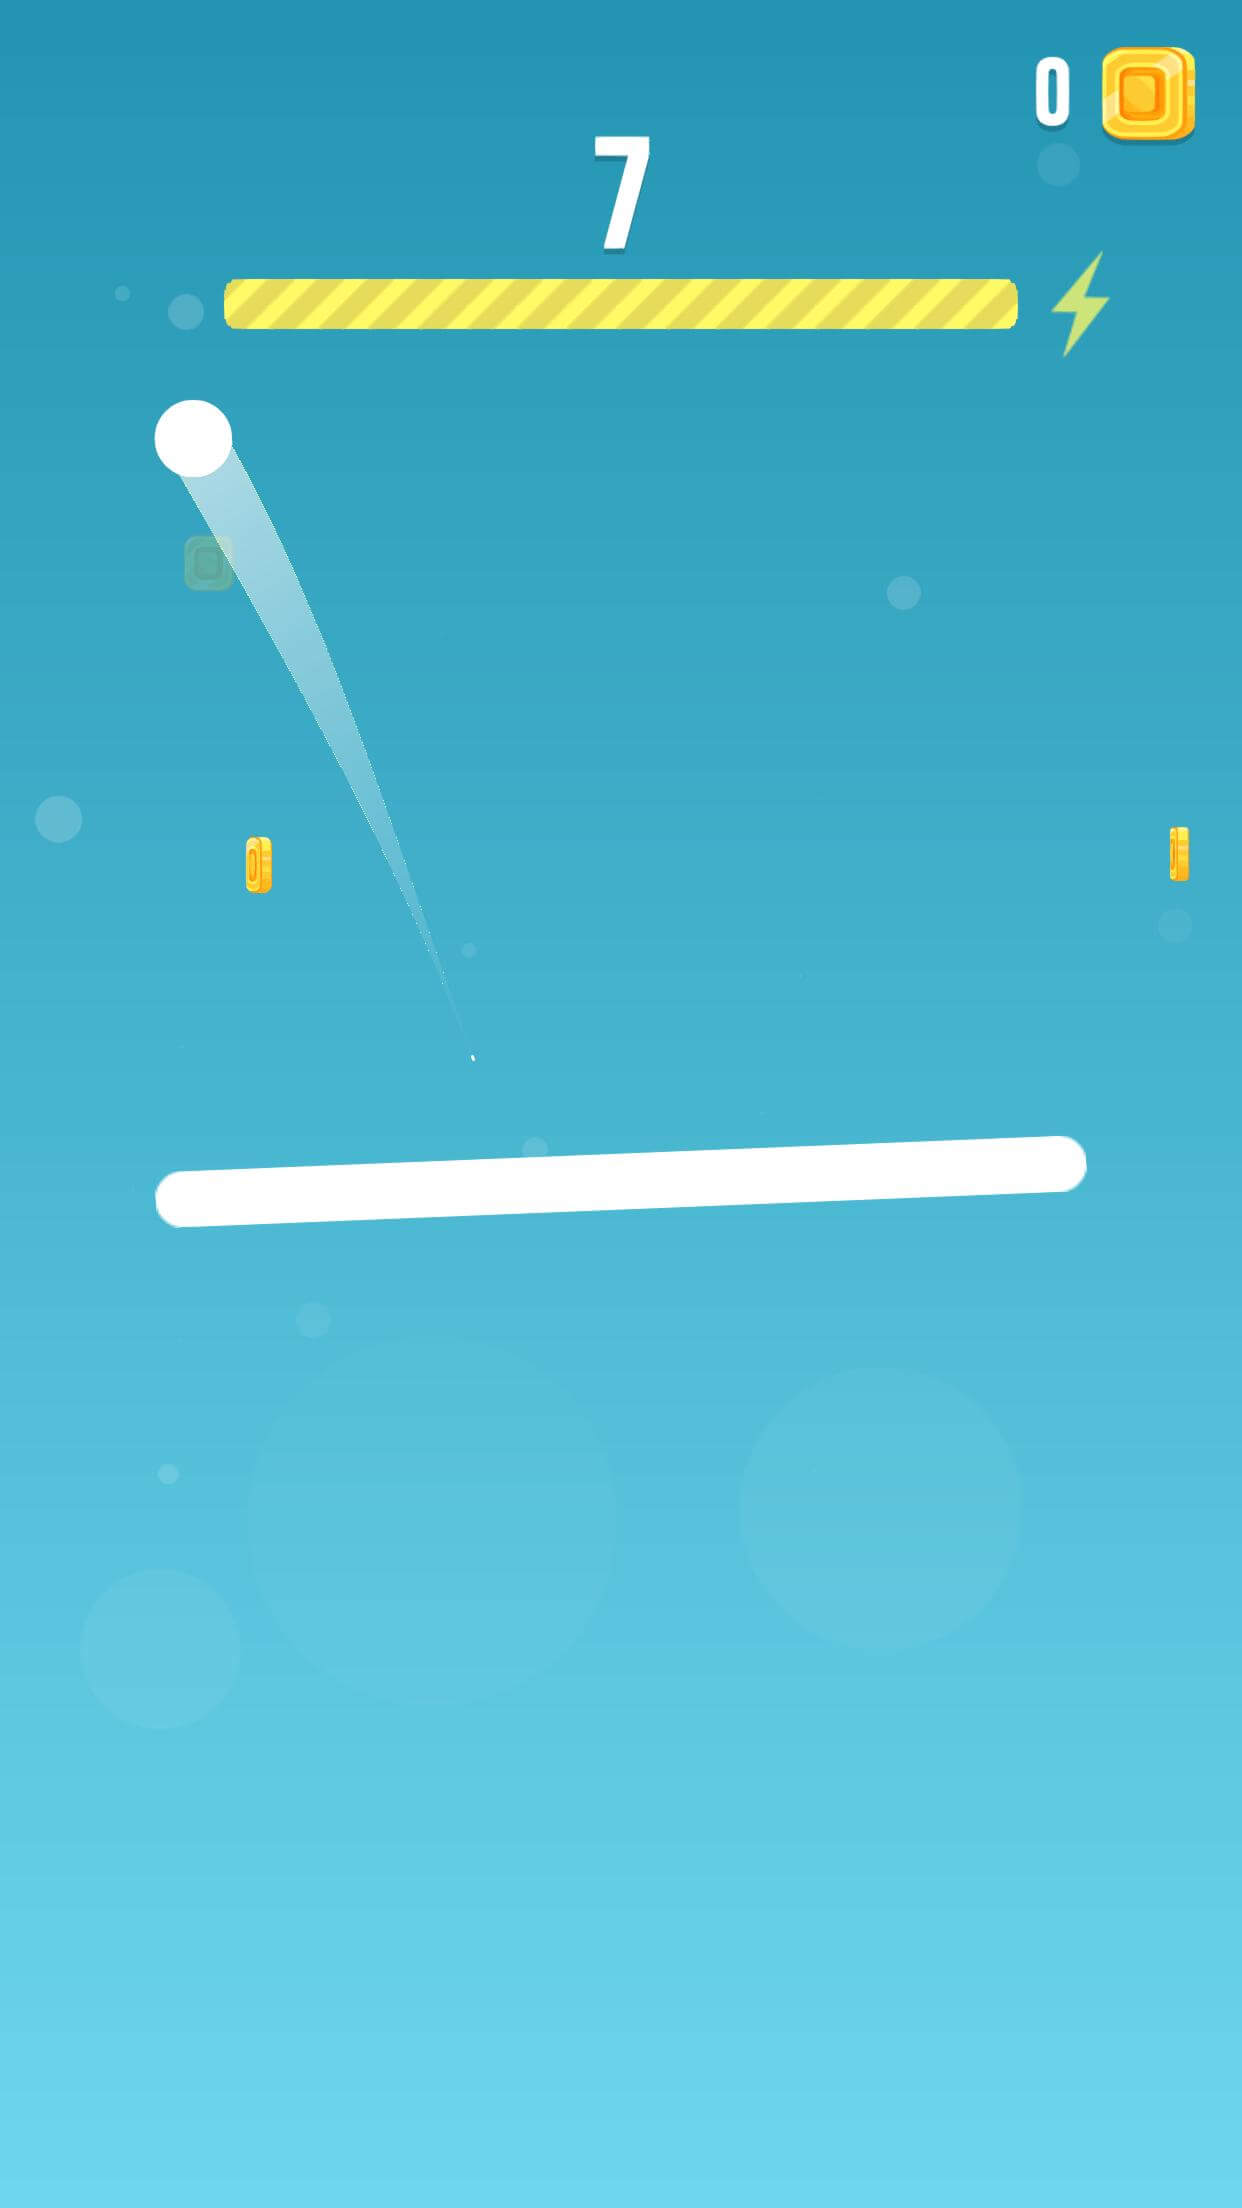 Ball Dropped Game Apple AppStore - Google Play Store Image 1